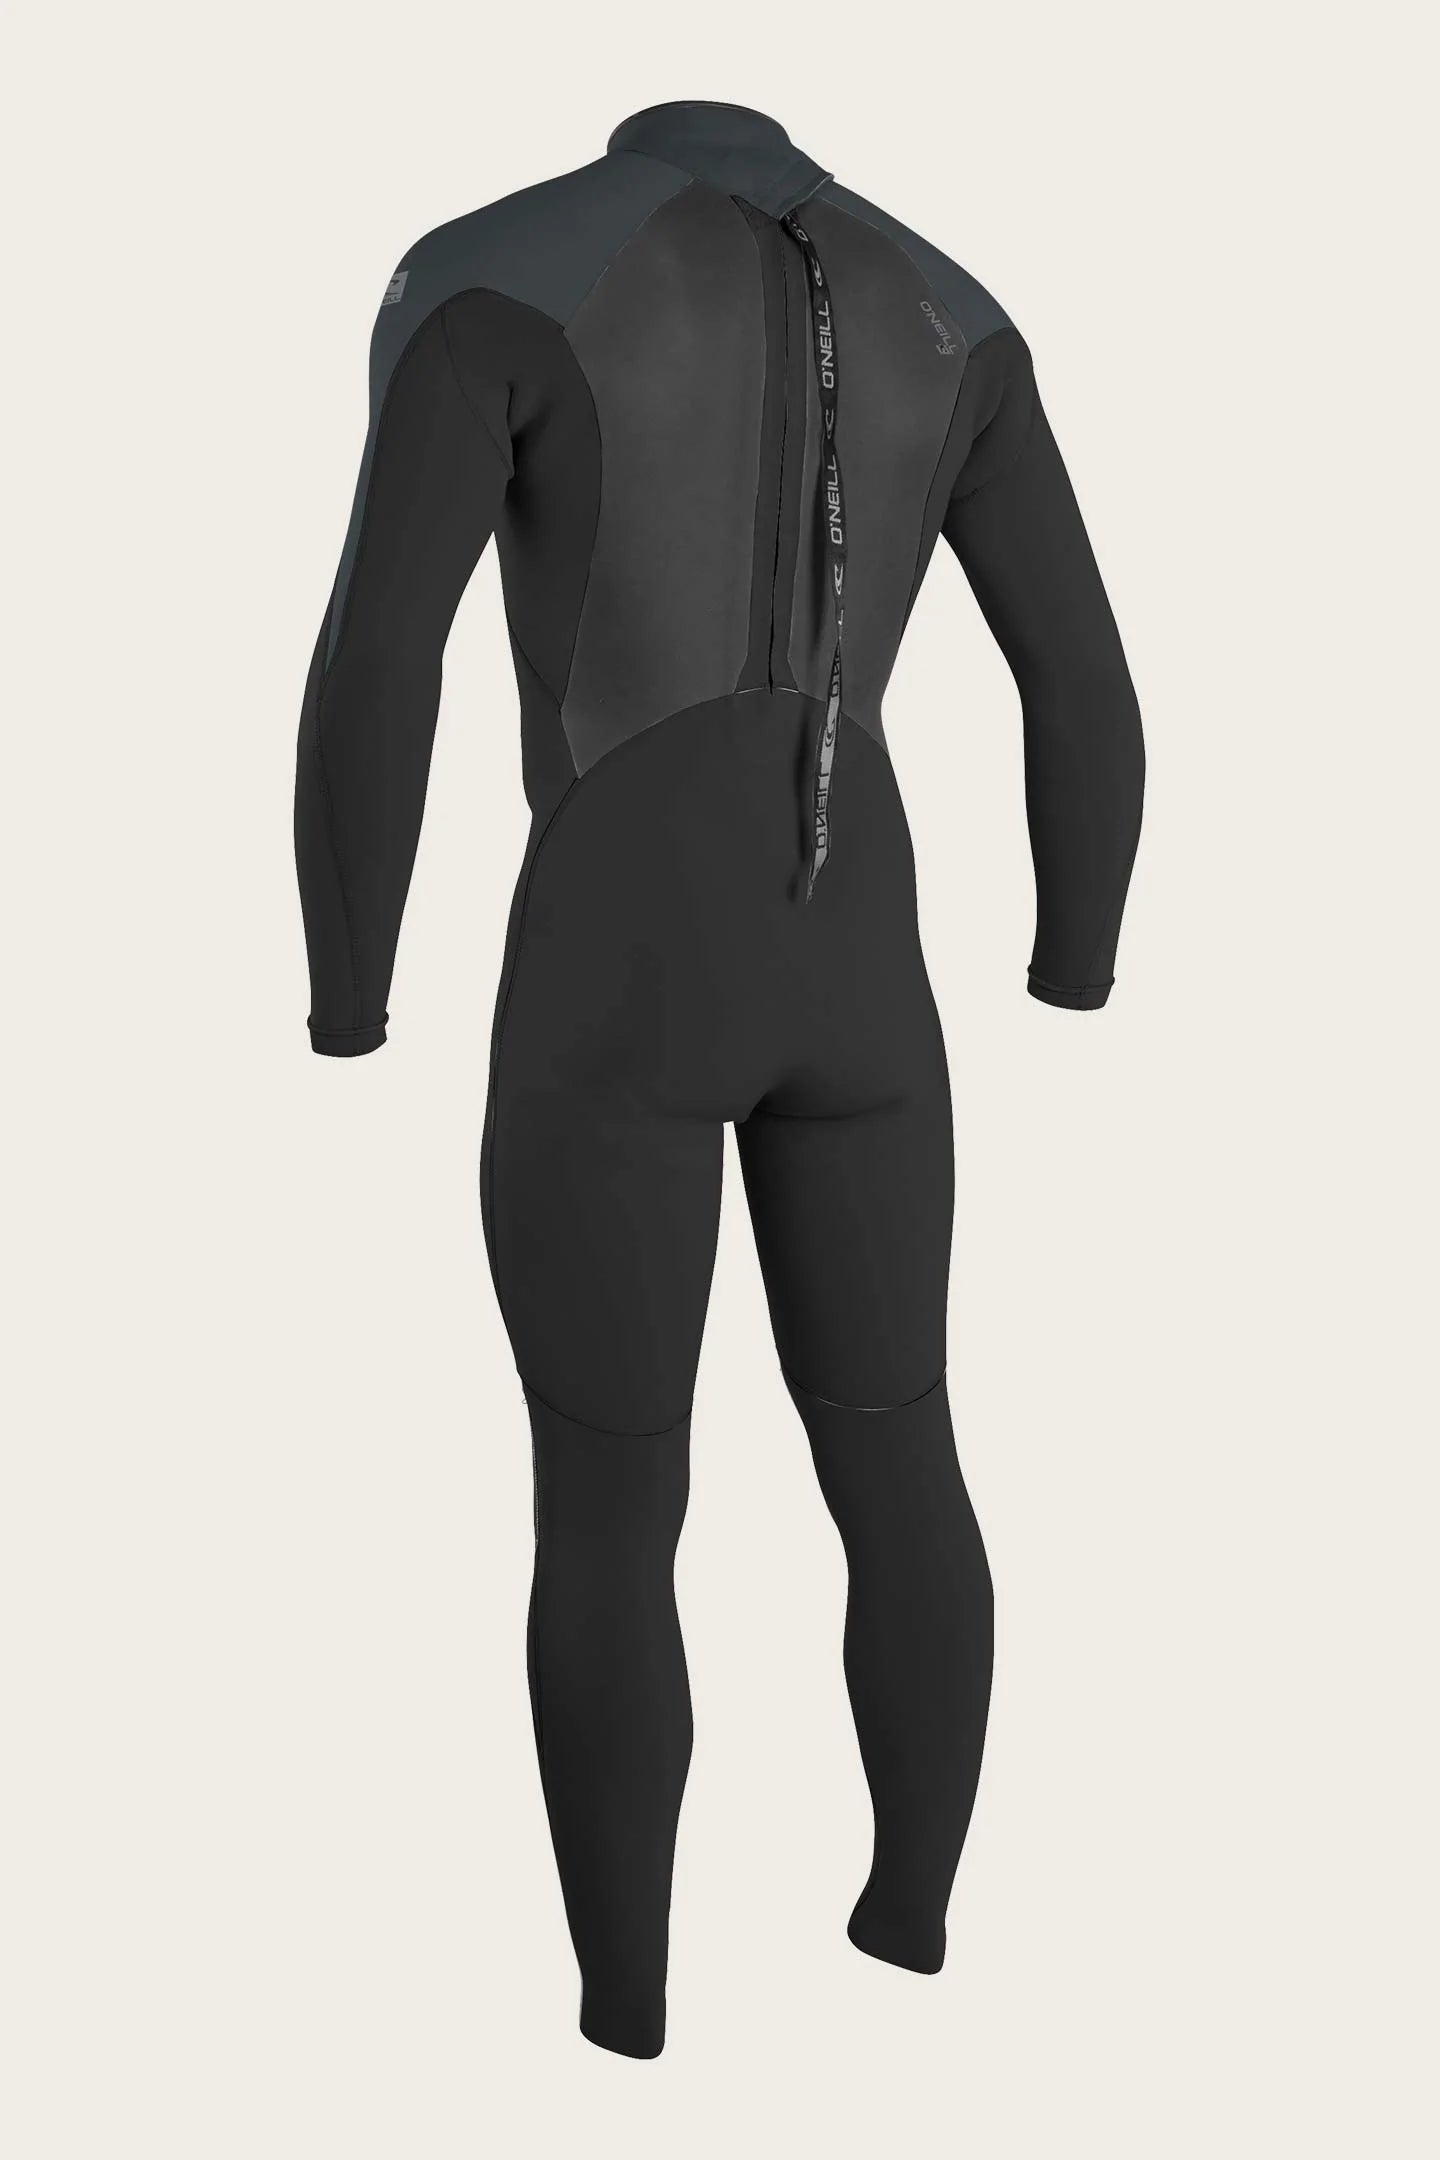 O'NEILL MENS 4/3MM EPIC BACK ZIP WETSUIT